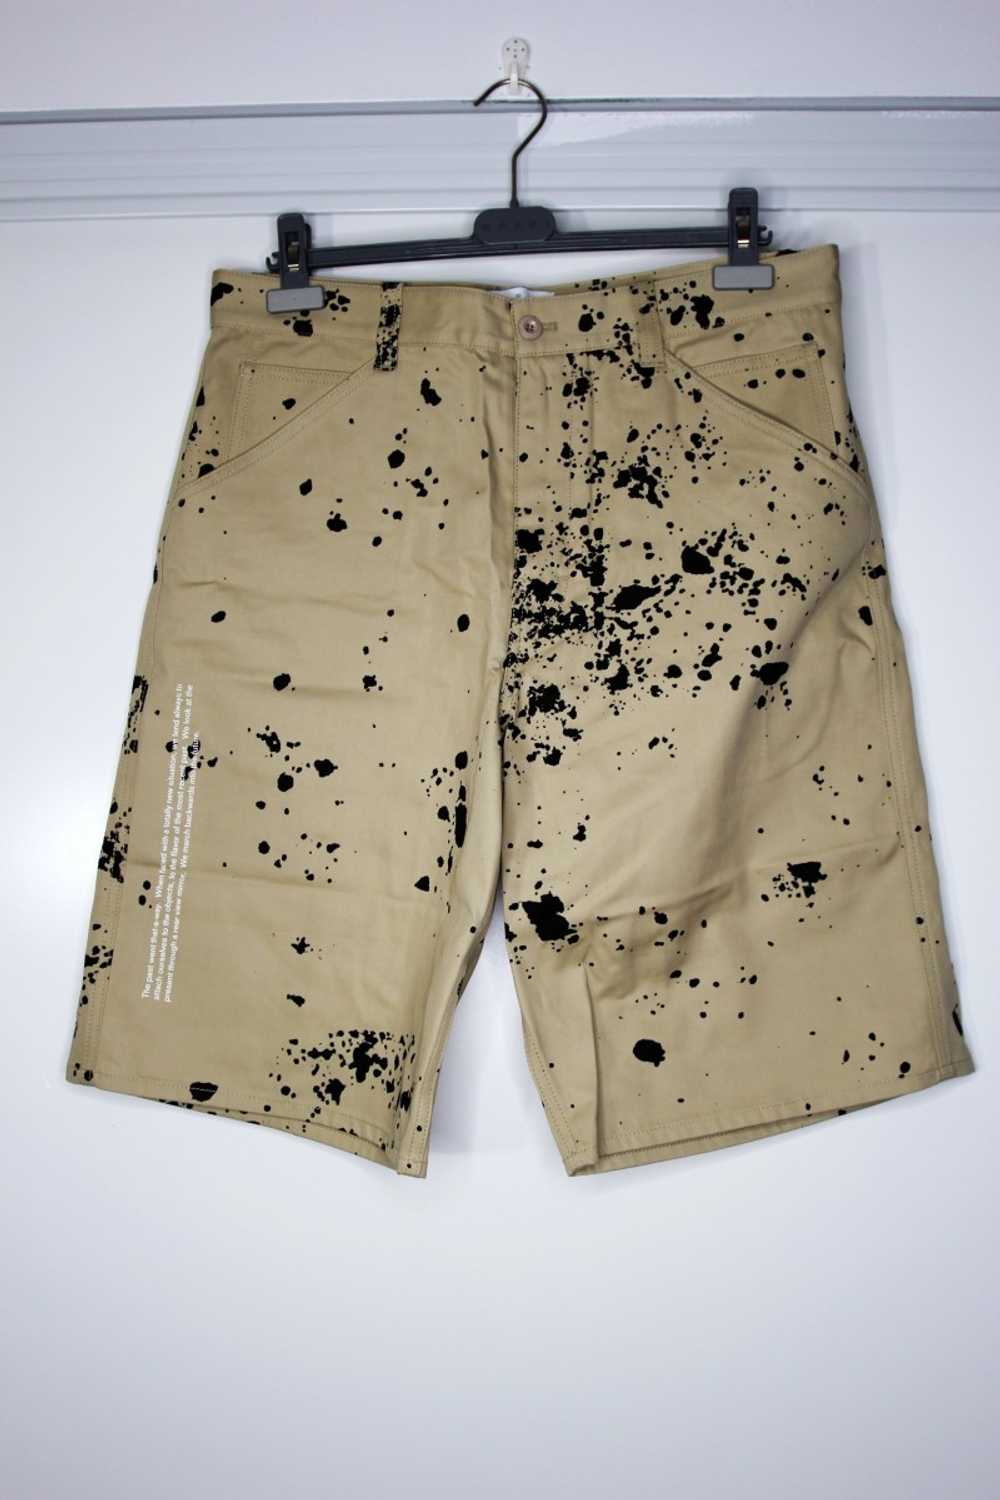 BNWT SS19 OAMC ORION SHORTS 32 - image 2